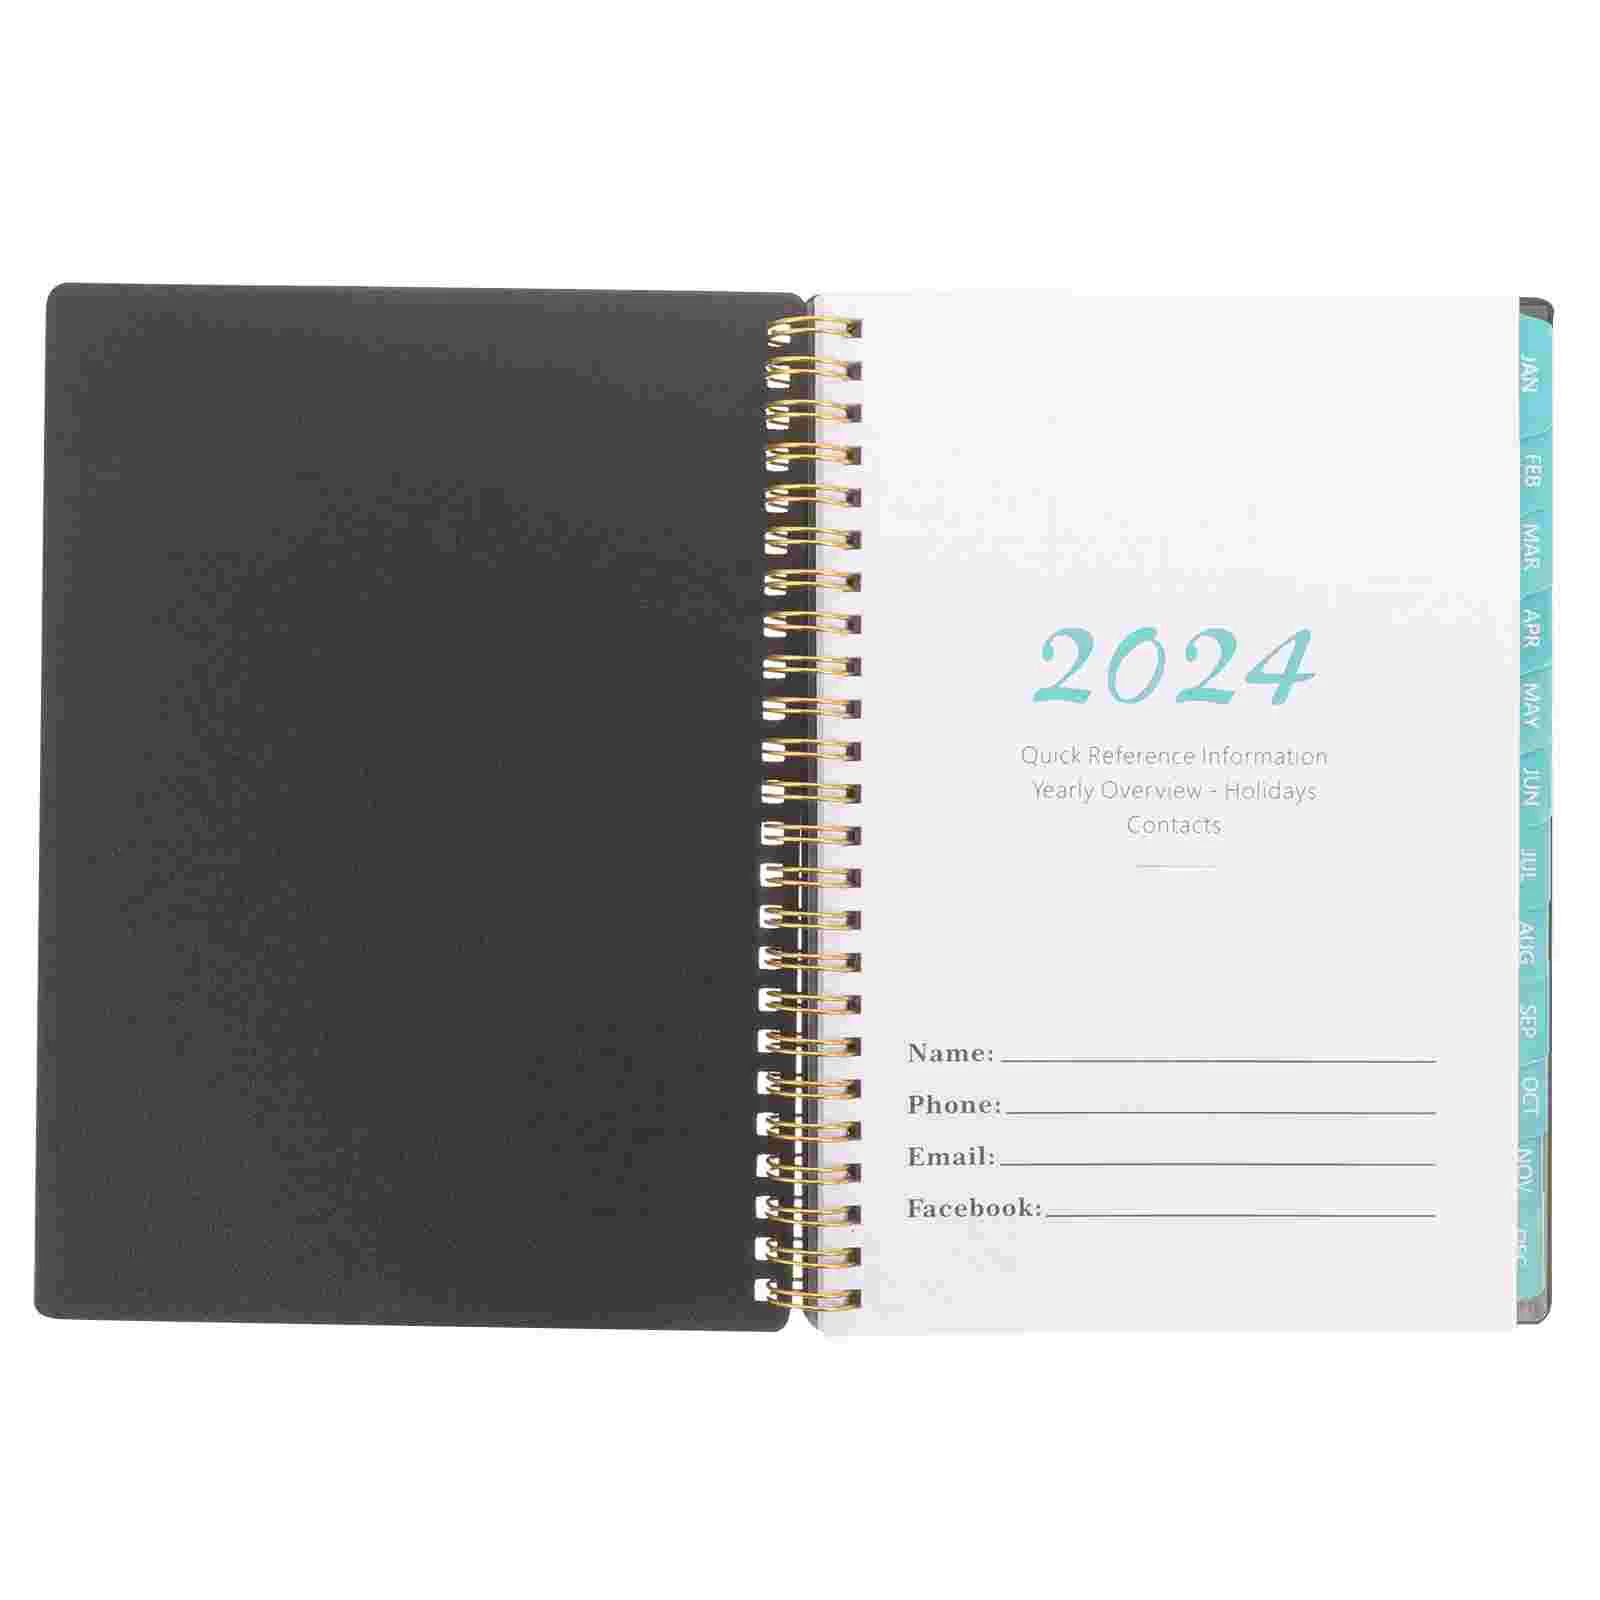 Coil Note Book Portable Planner Organizer Office Academic Planner Office Accessory kinbor weekly planner notebook 2023 agenda schedule daily monthly journal book portable record diary planner notepad schooloffic